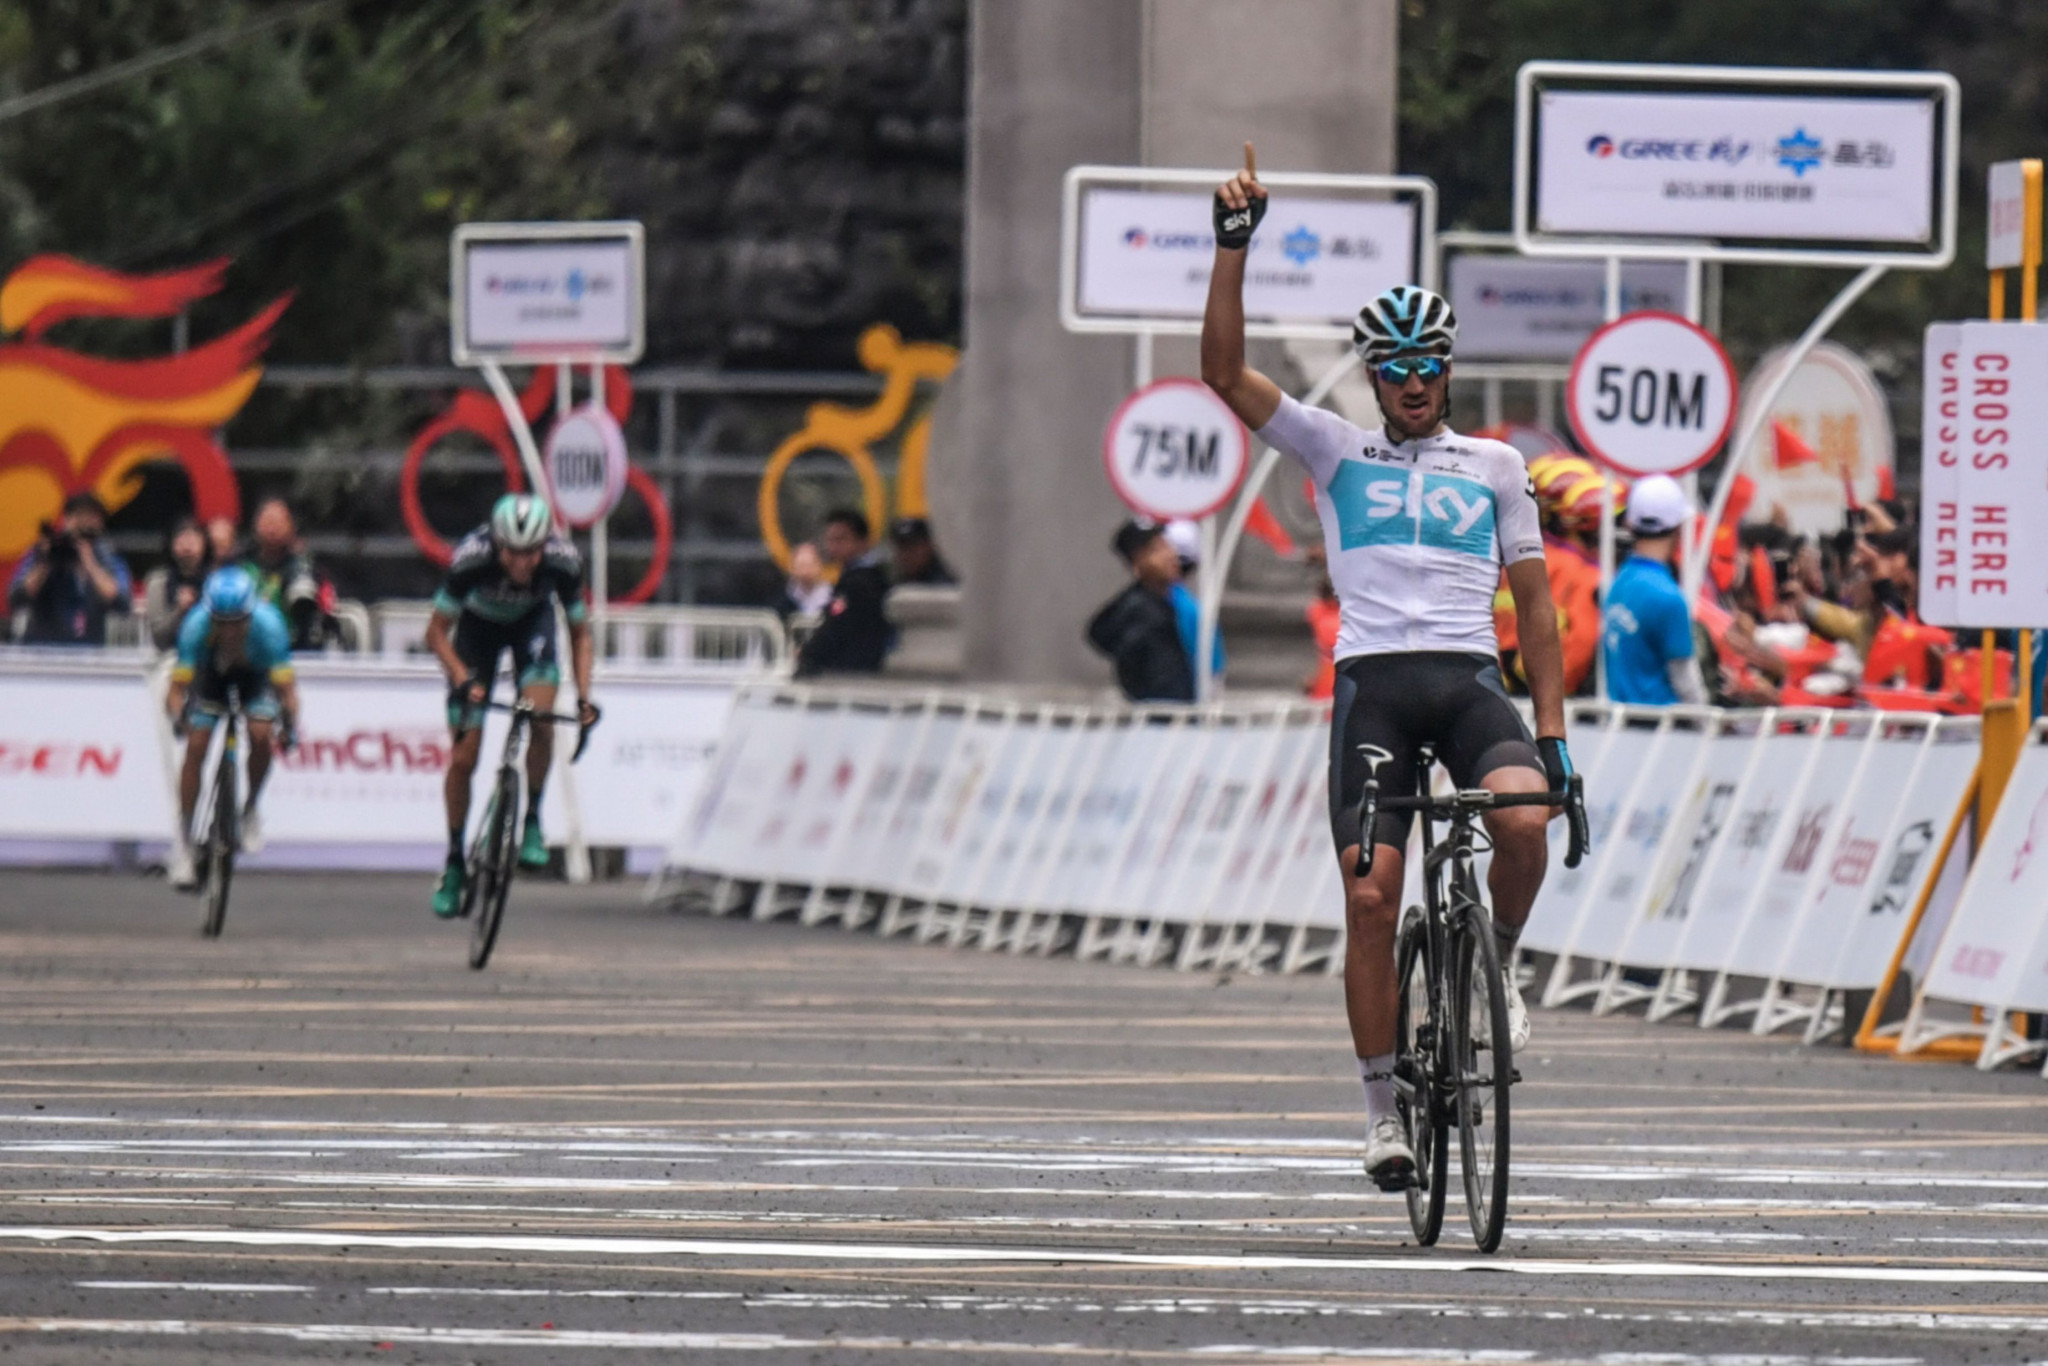 Moscon wins key stage at Tour of Guangxi to take overall lead